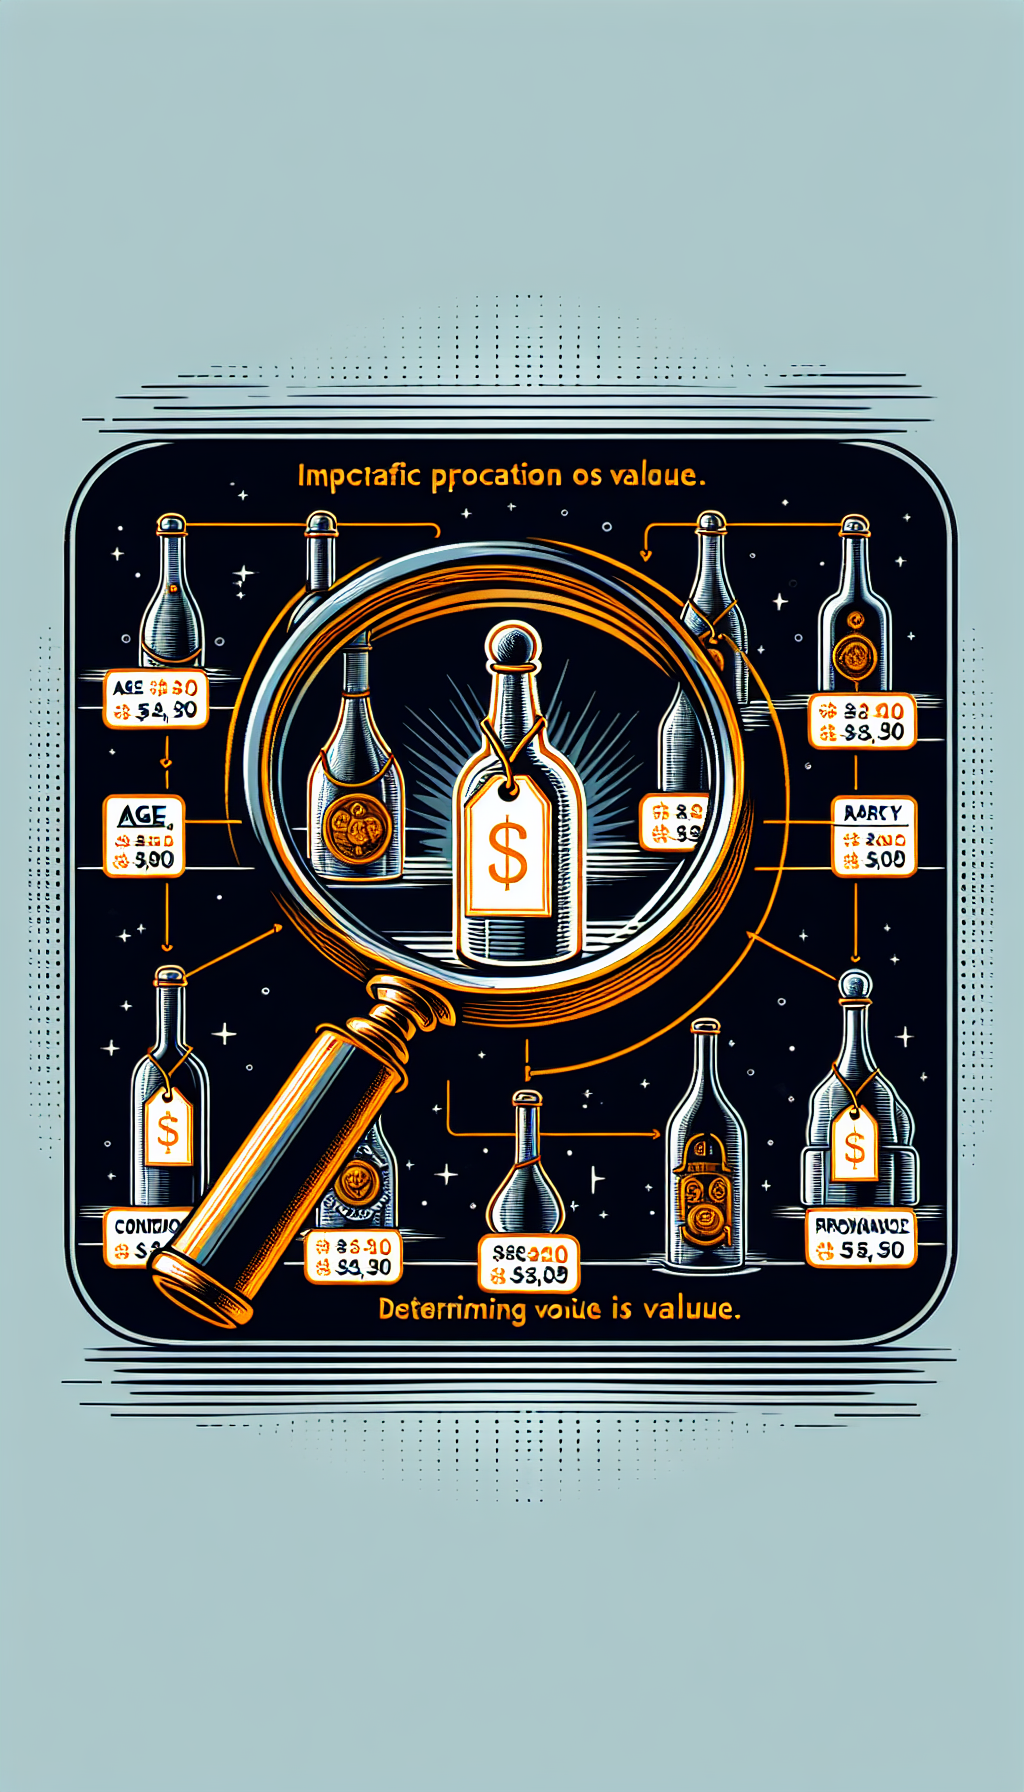 An illustration depicts a magnifying glass scrutinizing a line-up of antique bottles, each labeled with key factors like "Age," "Rarity," "Condition," and "Provenance." Beneath them, a shimmering price tag increases as the magnifying glass moves towards the right, visually assessing and amplifying the bottles' worth, tying together the meticulous appraisal process and the value of antiques.